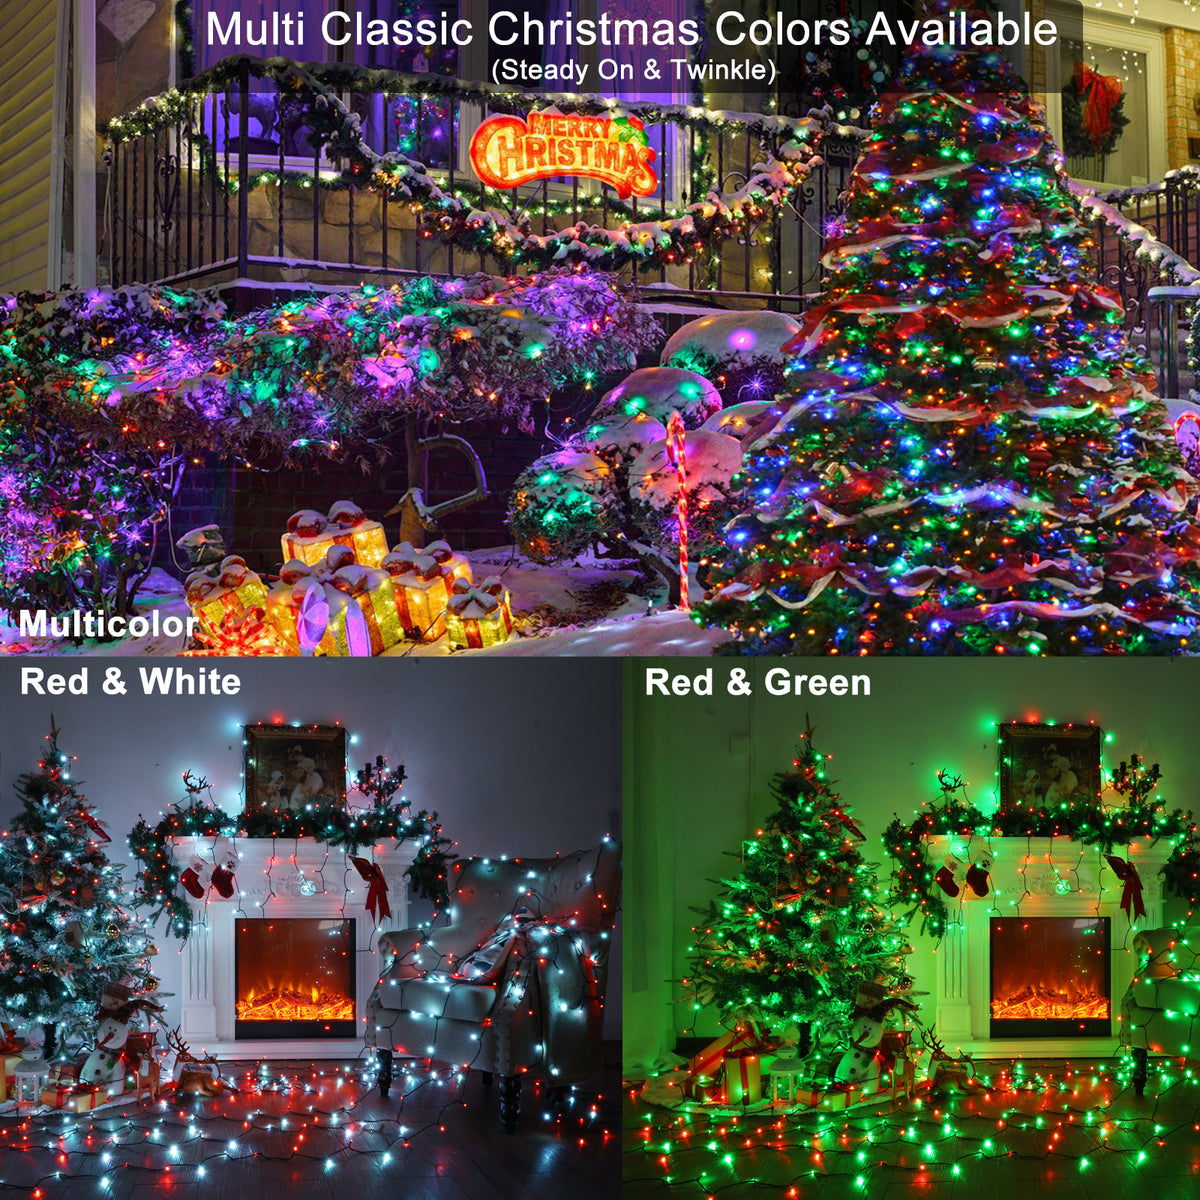 Color Changing Christmas Lights, 33ft 100 LED RGB Halloween Lights with Remote, Dimmable Orange & Purple Lights String, USB Christmas Tree Lights, Indoor Xmas Lights for Year-round Party Decor